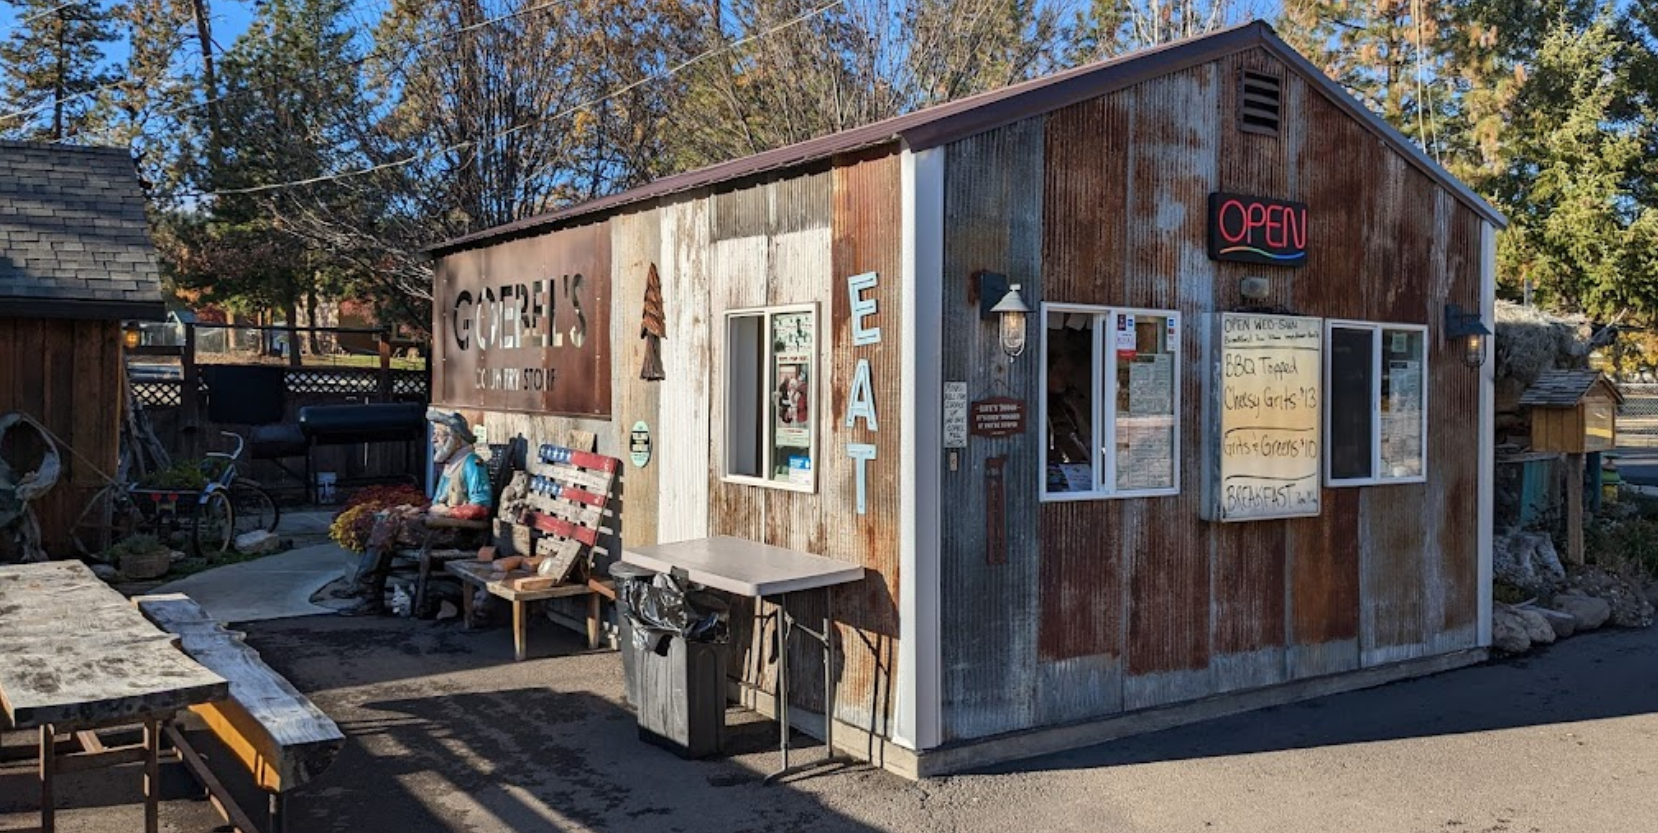 Folks Drive For Miles For This Finger Lickin’ Texas BBQ at a Remote Country Store in Oregon